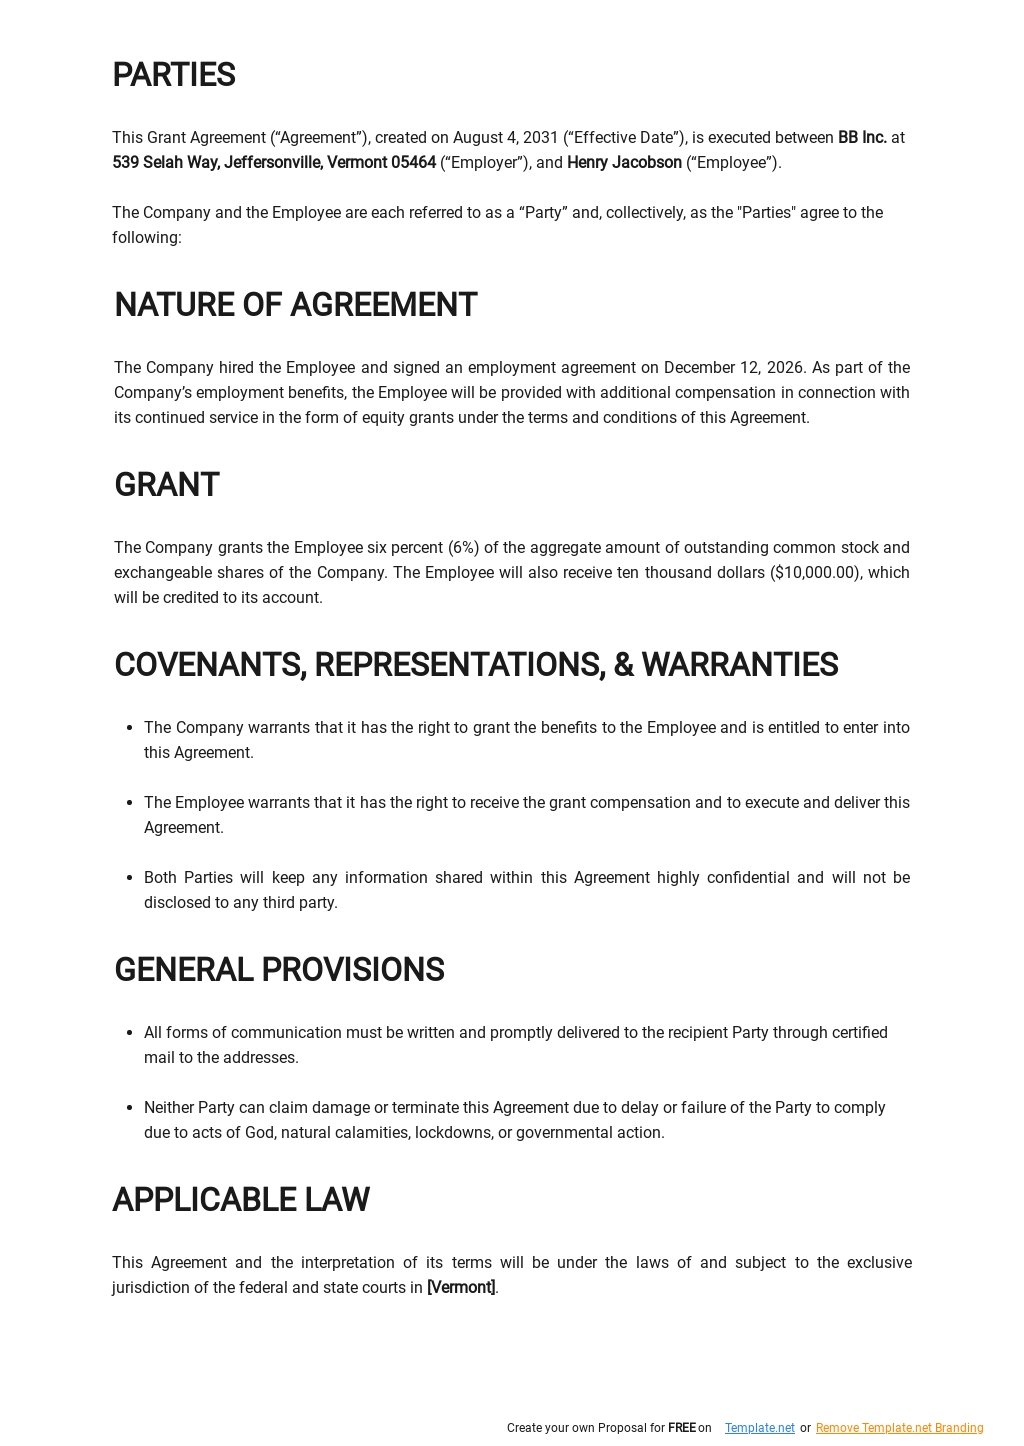 grant-agreement-template